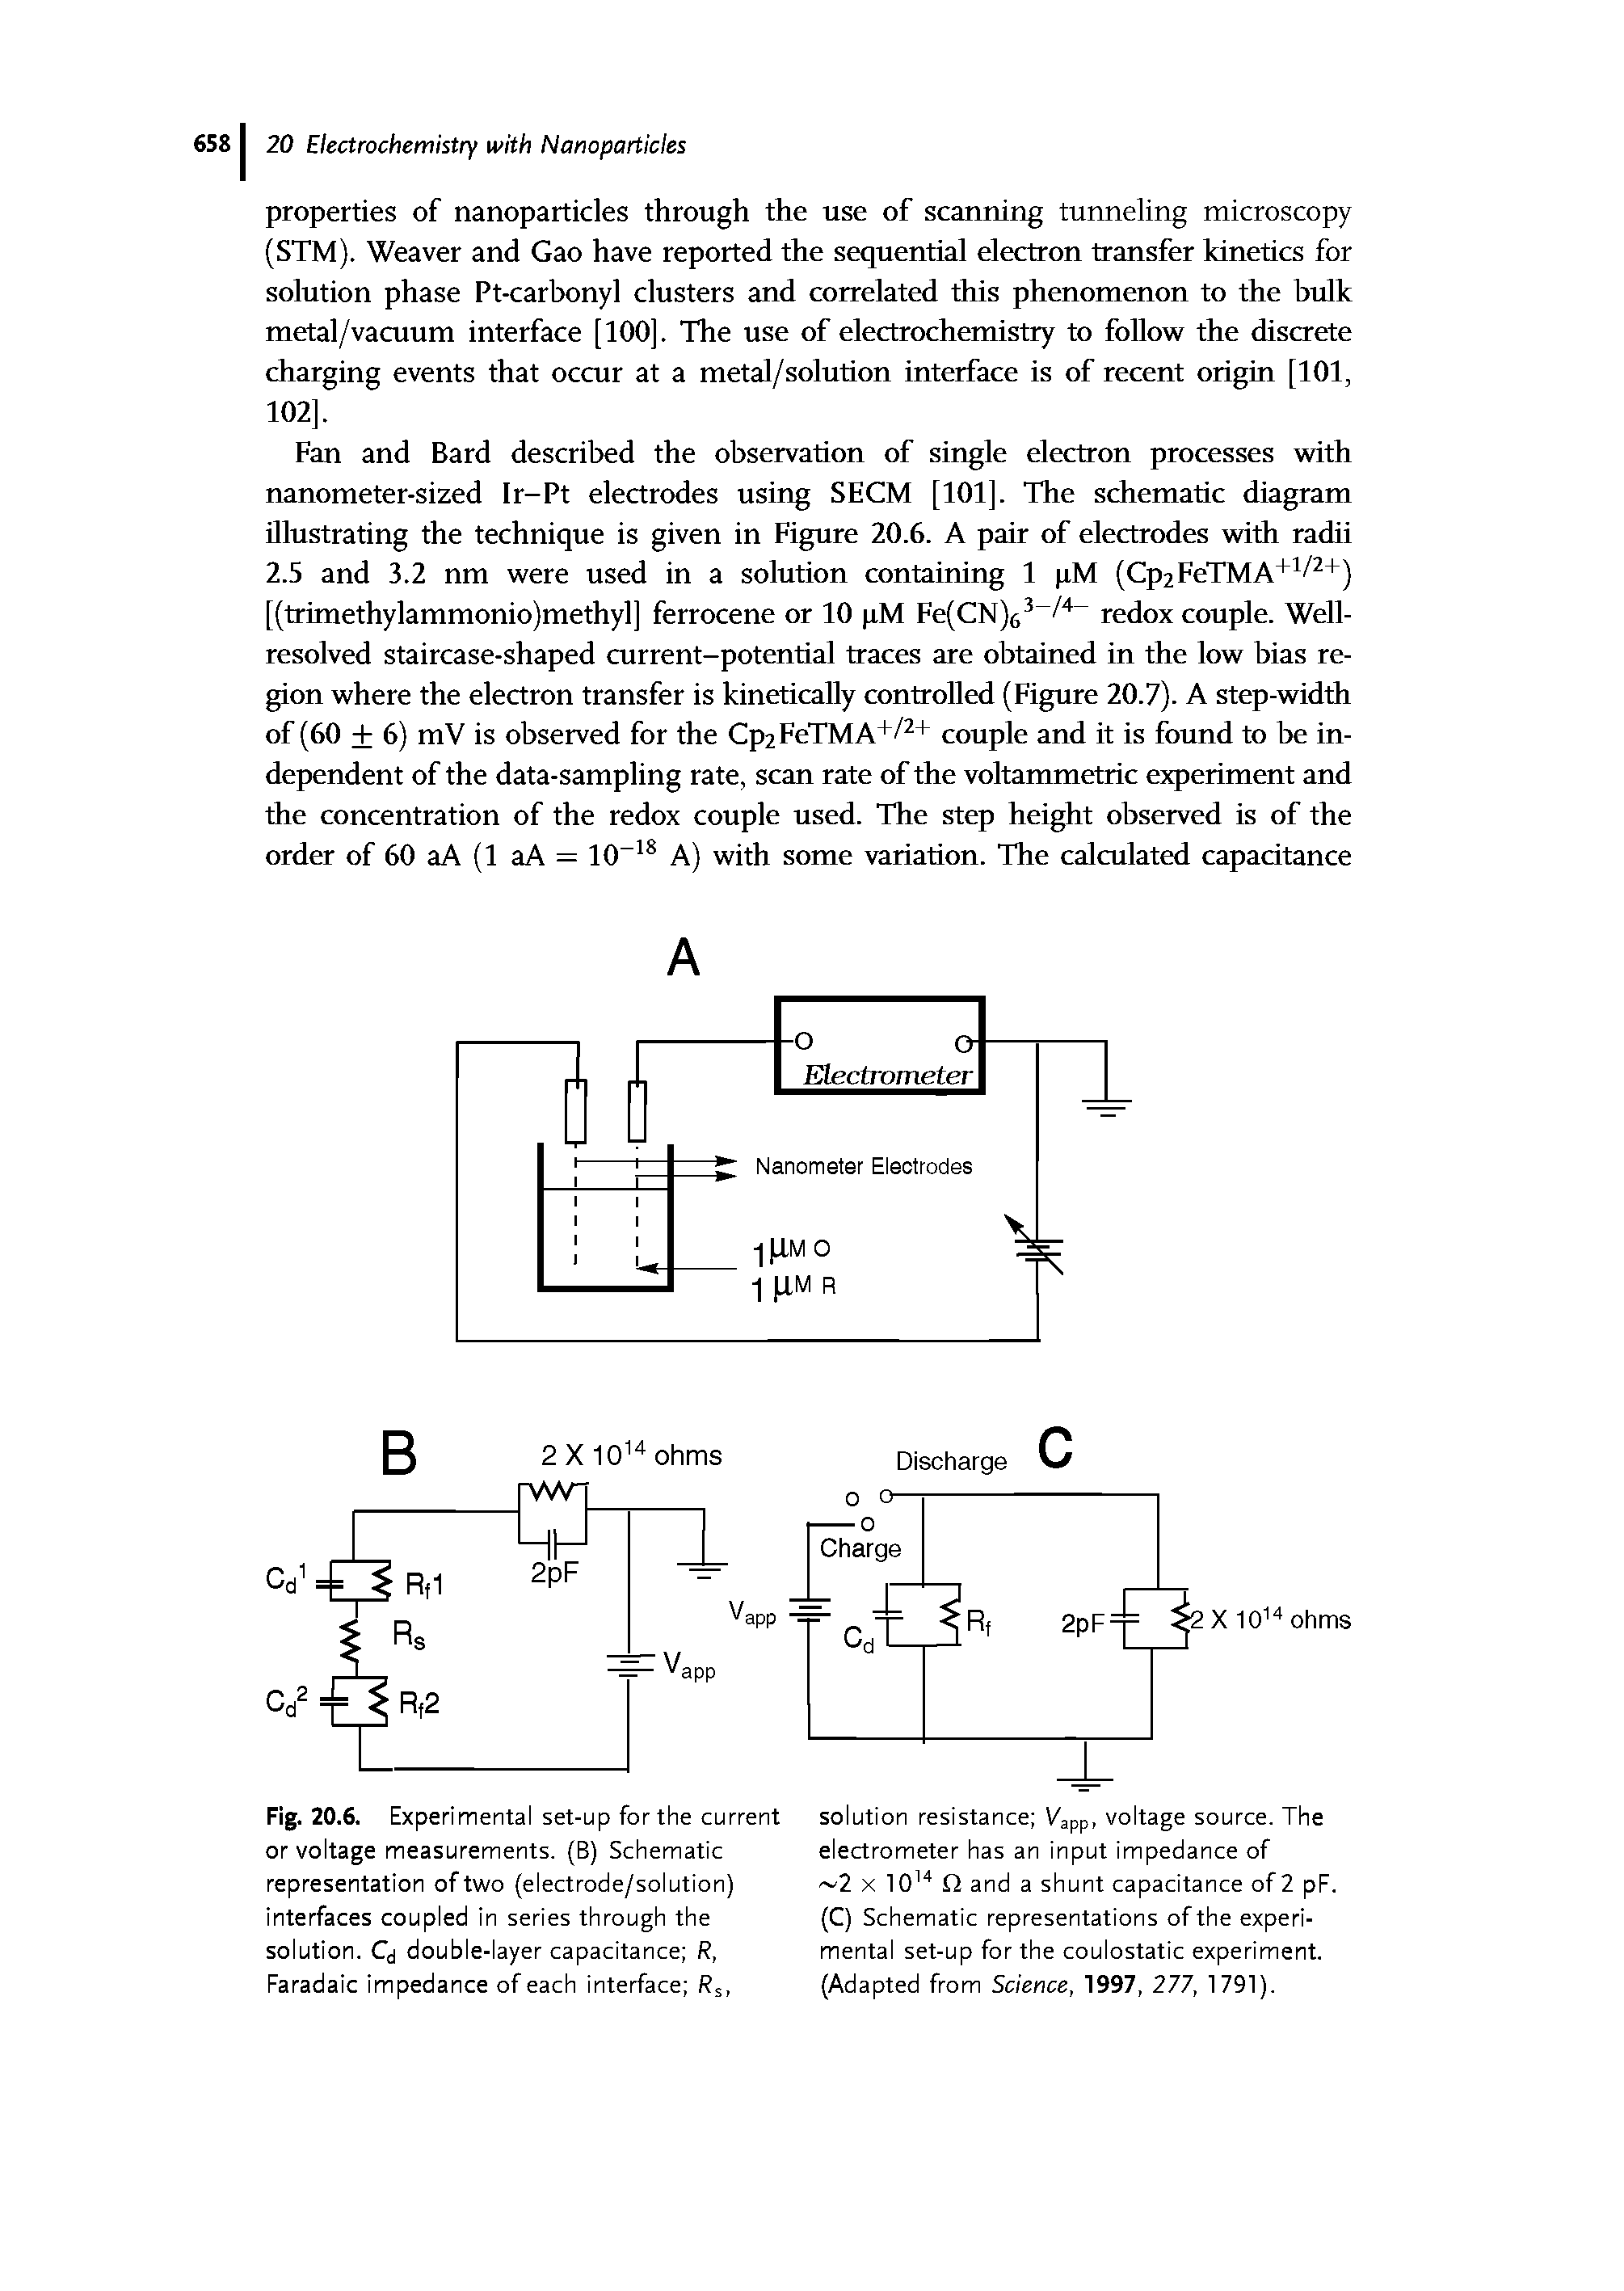 Fig. 20.6. Experimental set-up for the current or voltage measurements. (B) Schematic representation of two (electrode/solution) interfaces coupled in series through the solution. C j double-layer capacitance R, Faradaic impedance of each interface Rj,...